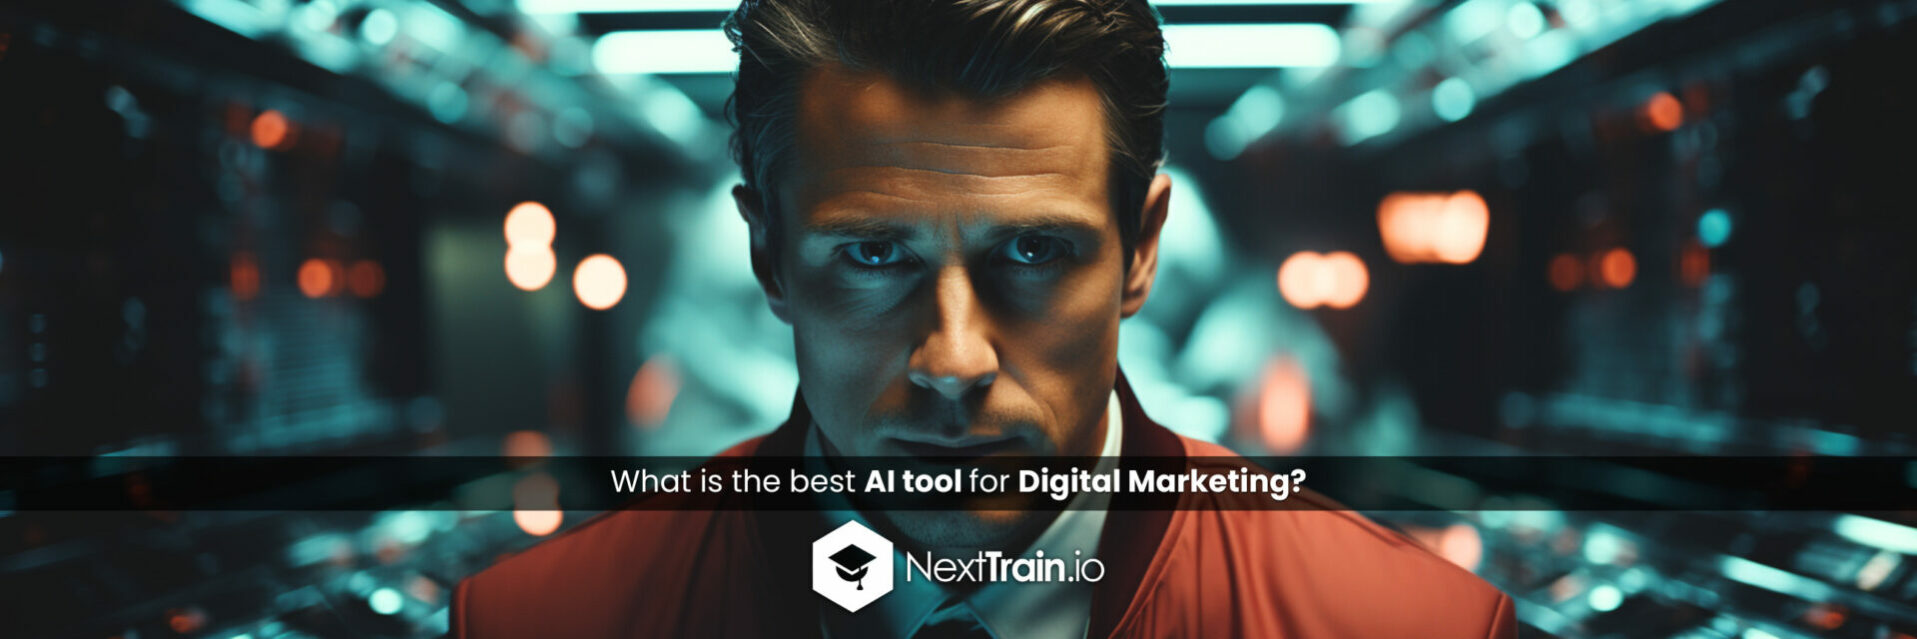 What is the best AI tool for Digital Marketing?